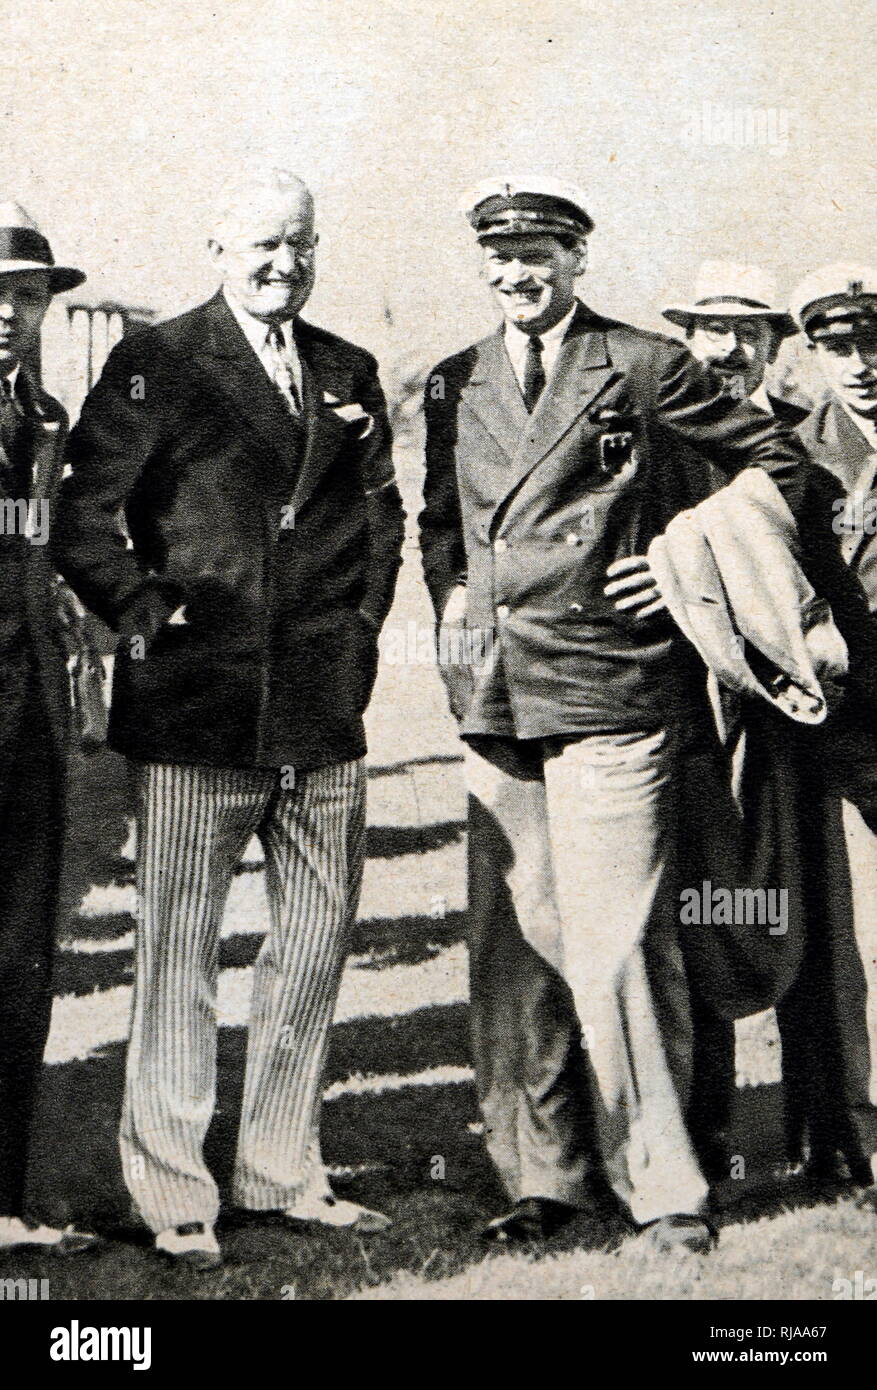 Photograph of Karl Ritter von Halt (Left) (1981 - 1964) during the 1932 Olympic games. He was the President of the Committee for the organization of the Fourth Winter Olympics & In 1944 Karl Ritter von Halt led the Sports Office of the Third Reich. Stock Photo